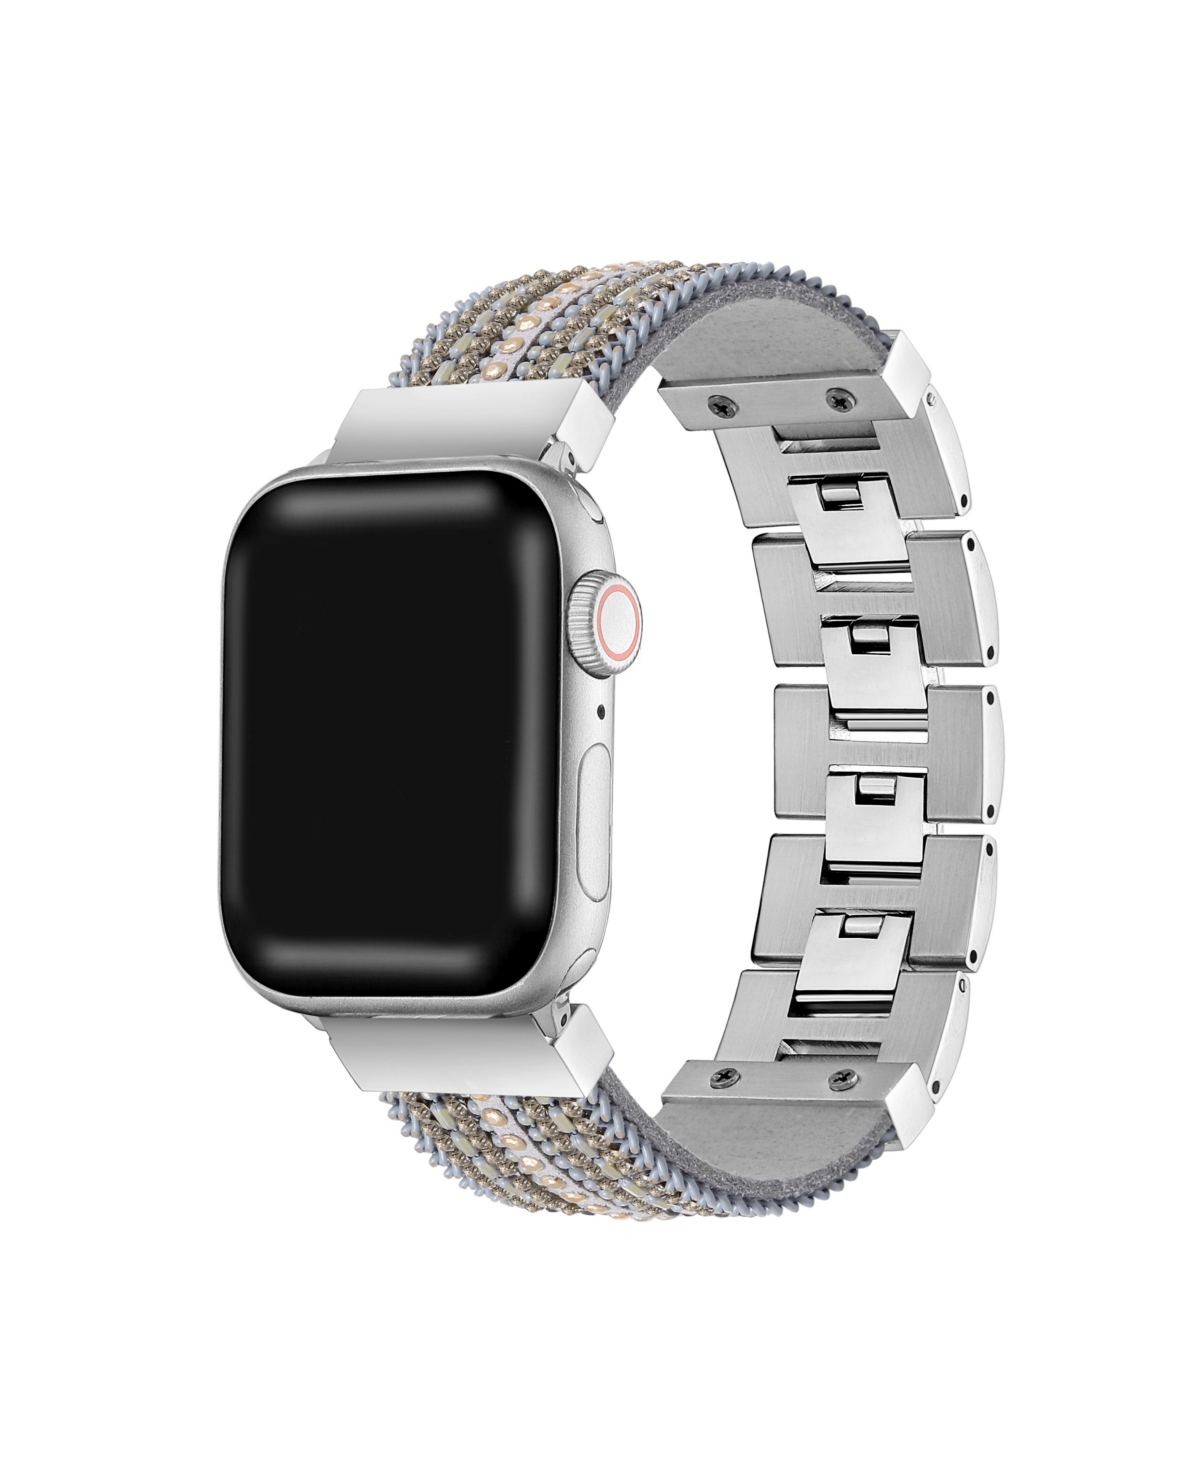 Men's and Women's Black Silver-Tone Jewelry Band for Apple Watch 42mm - Assorted